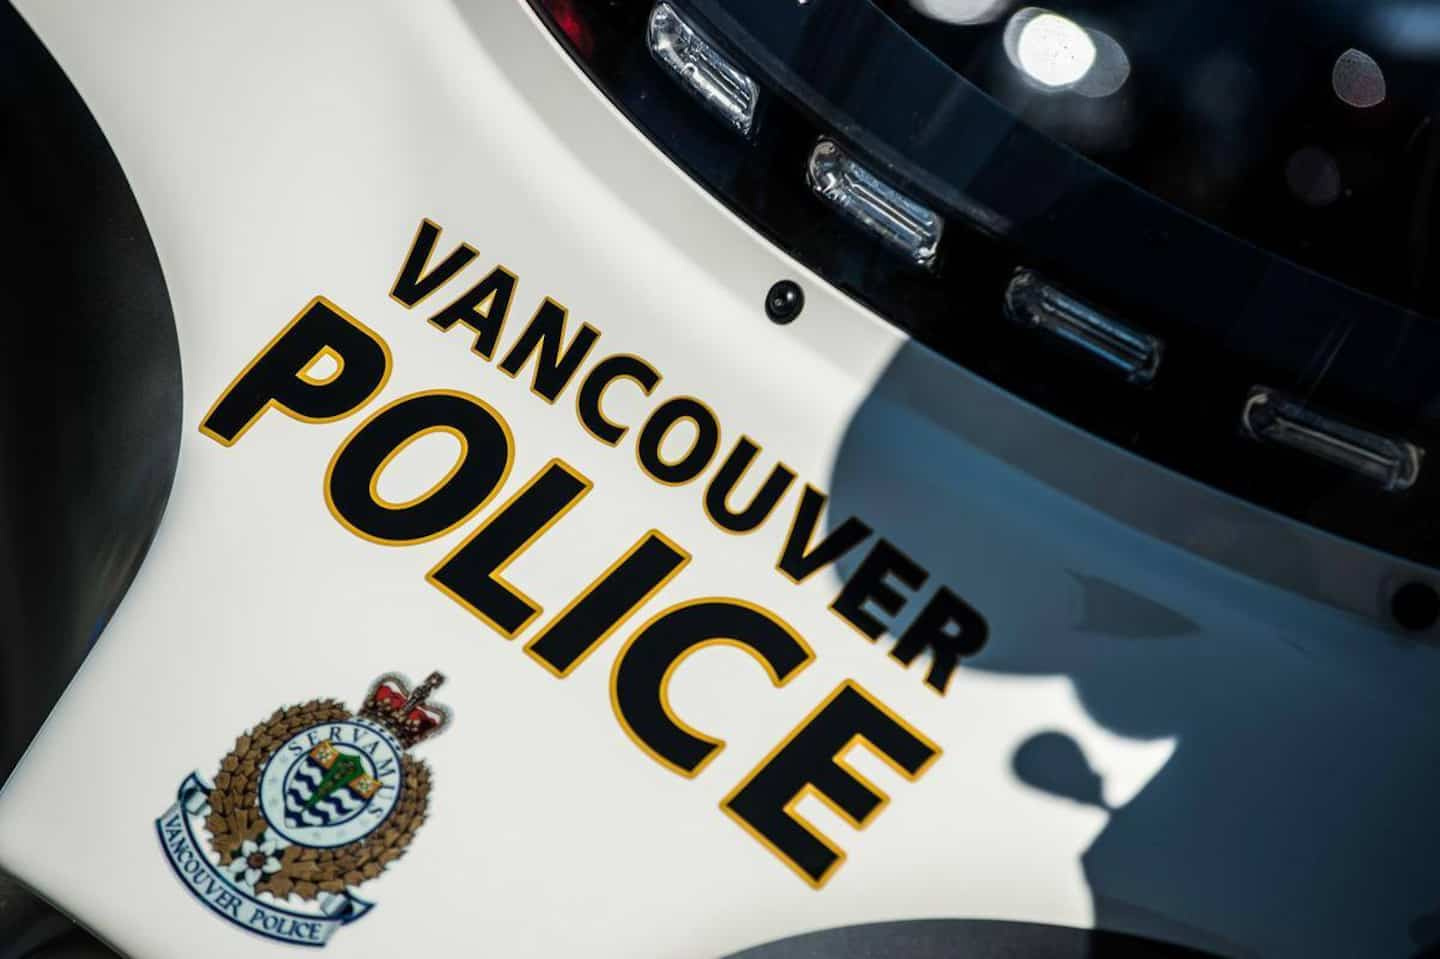 Vancouver: a shooting breaks out after the attack on a police officer